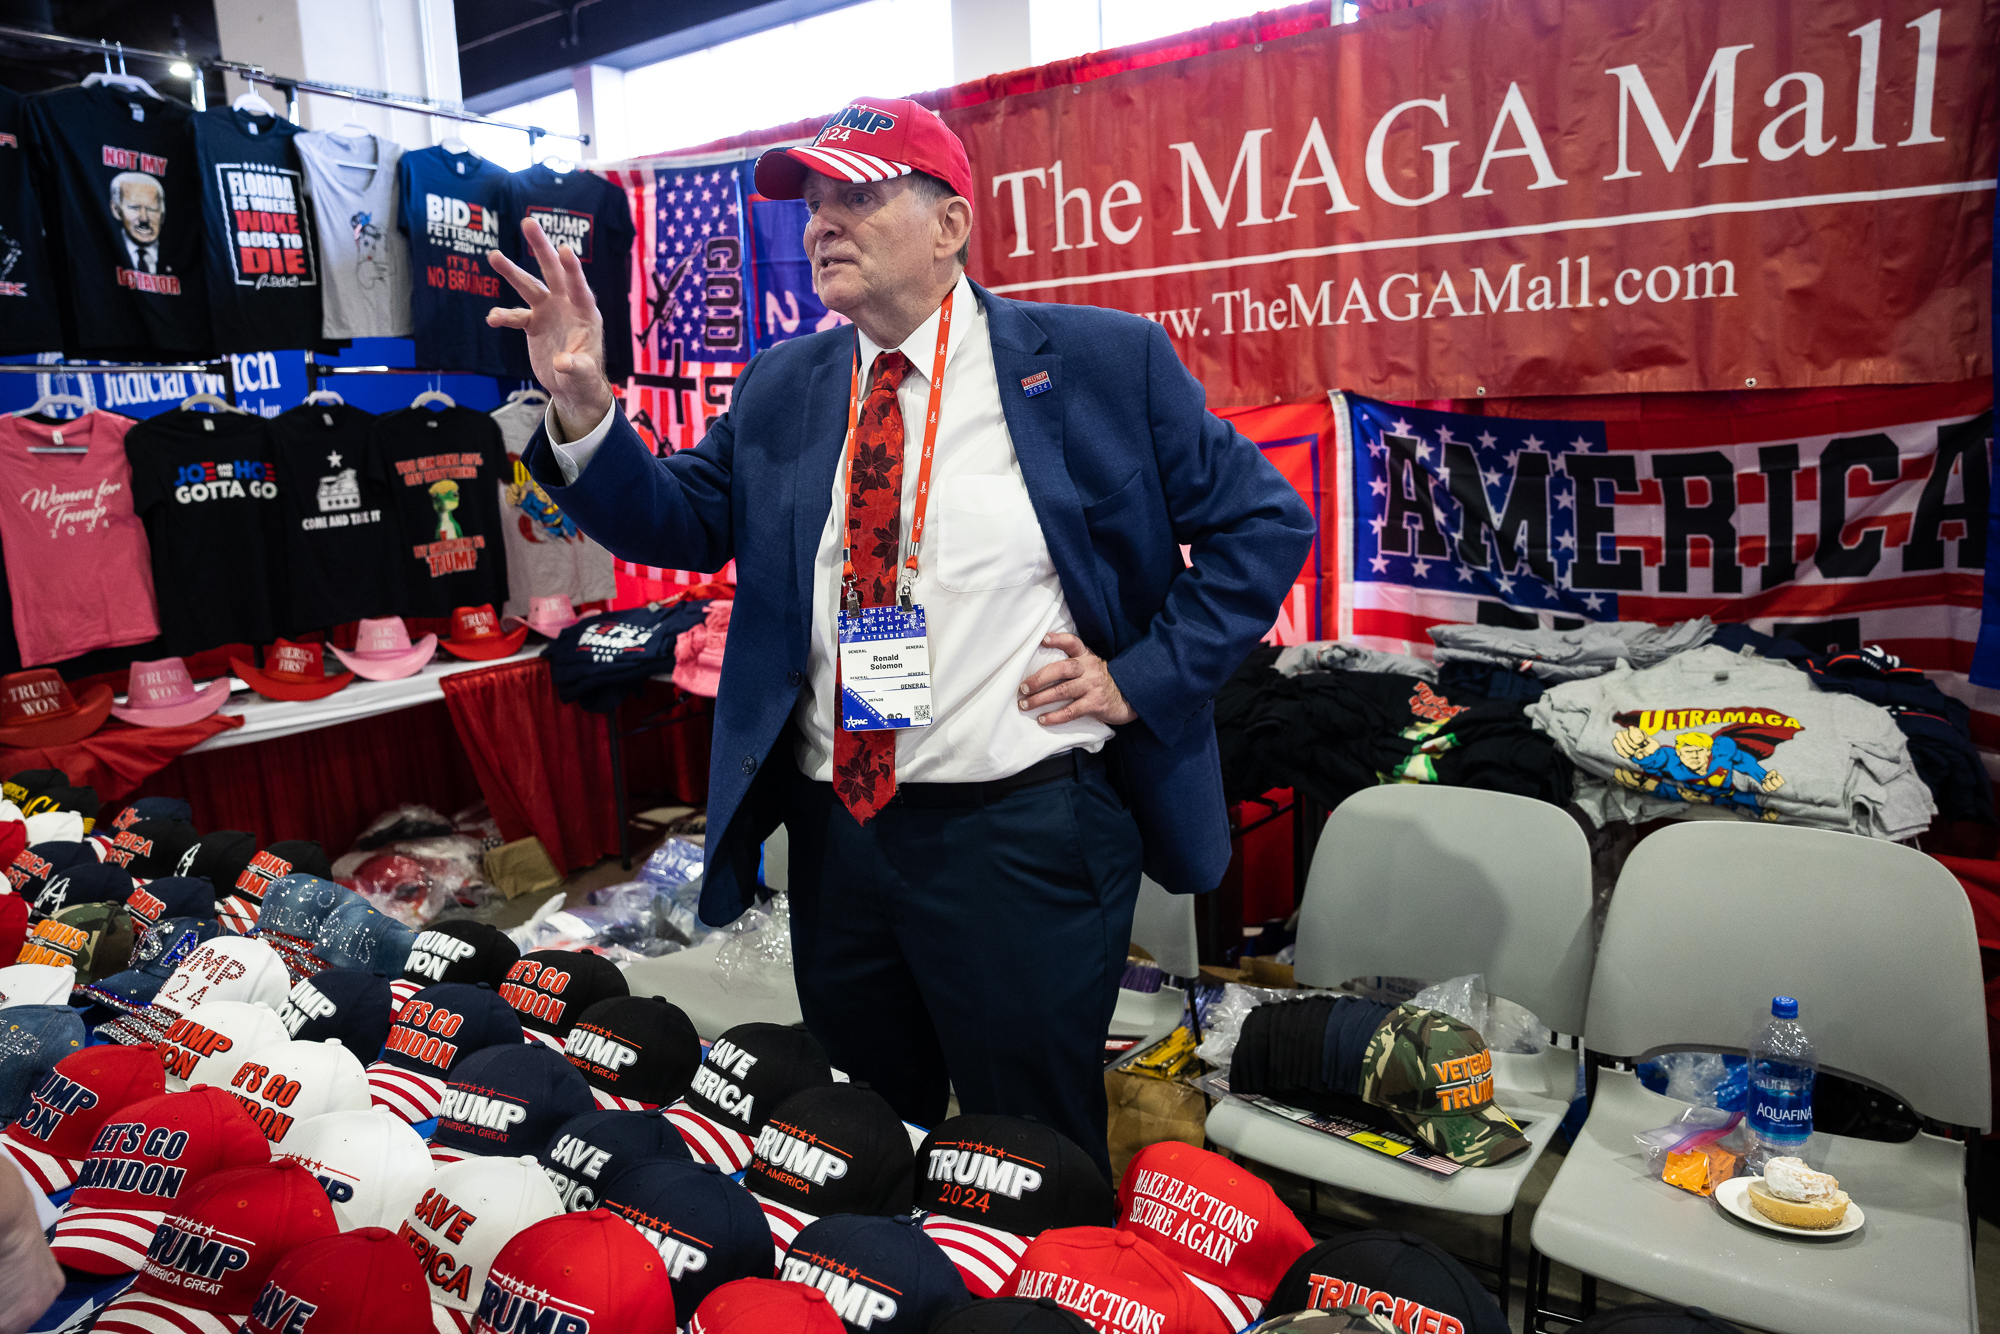 Ronald Solomon works at his merchandise stand at the Conservative Political Action Conference (CPAC) at the Gaylord National Resort and Convention Center in National Harbor, Md. on March 2, 2023.